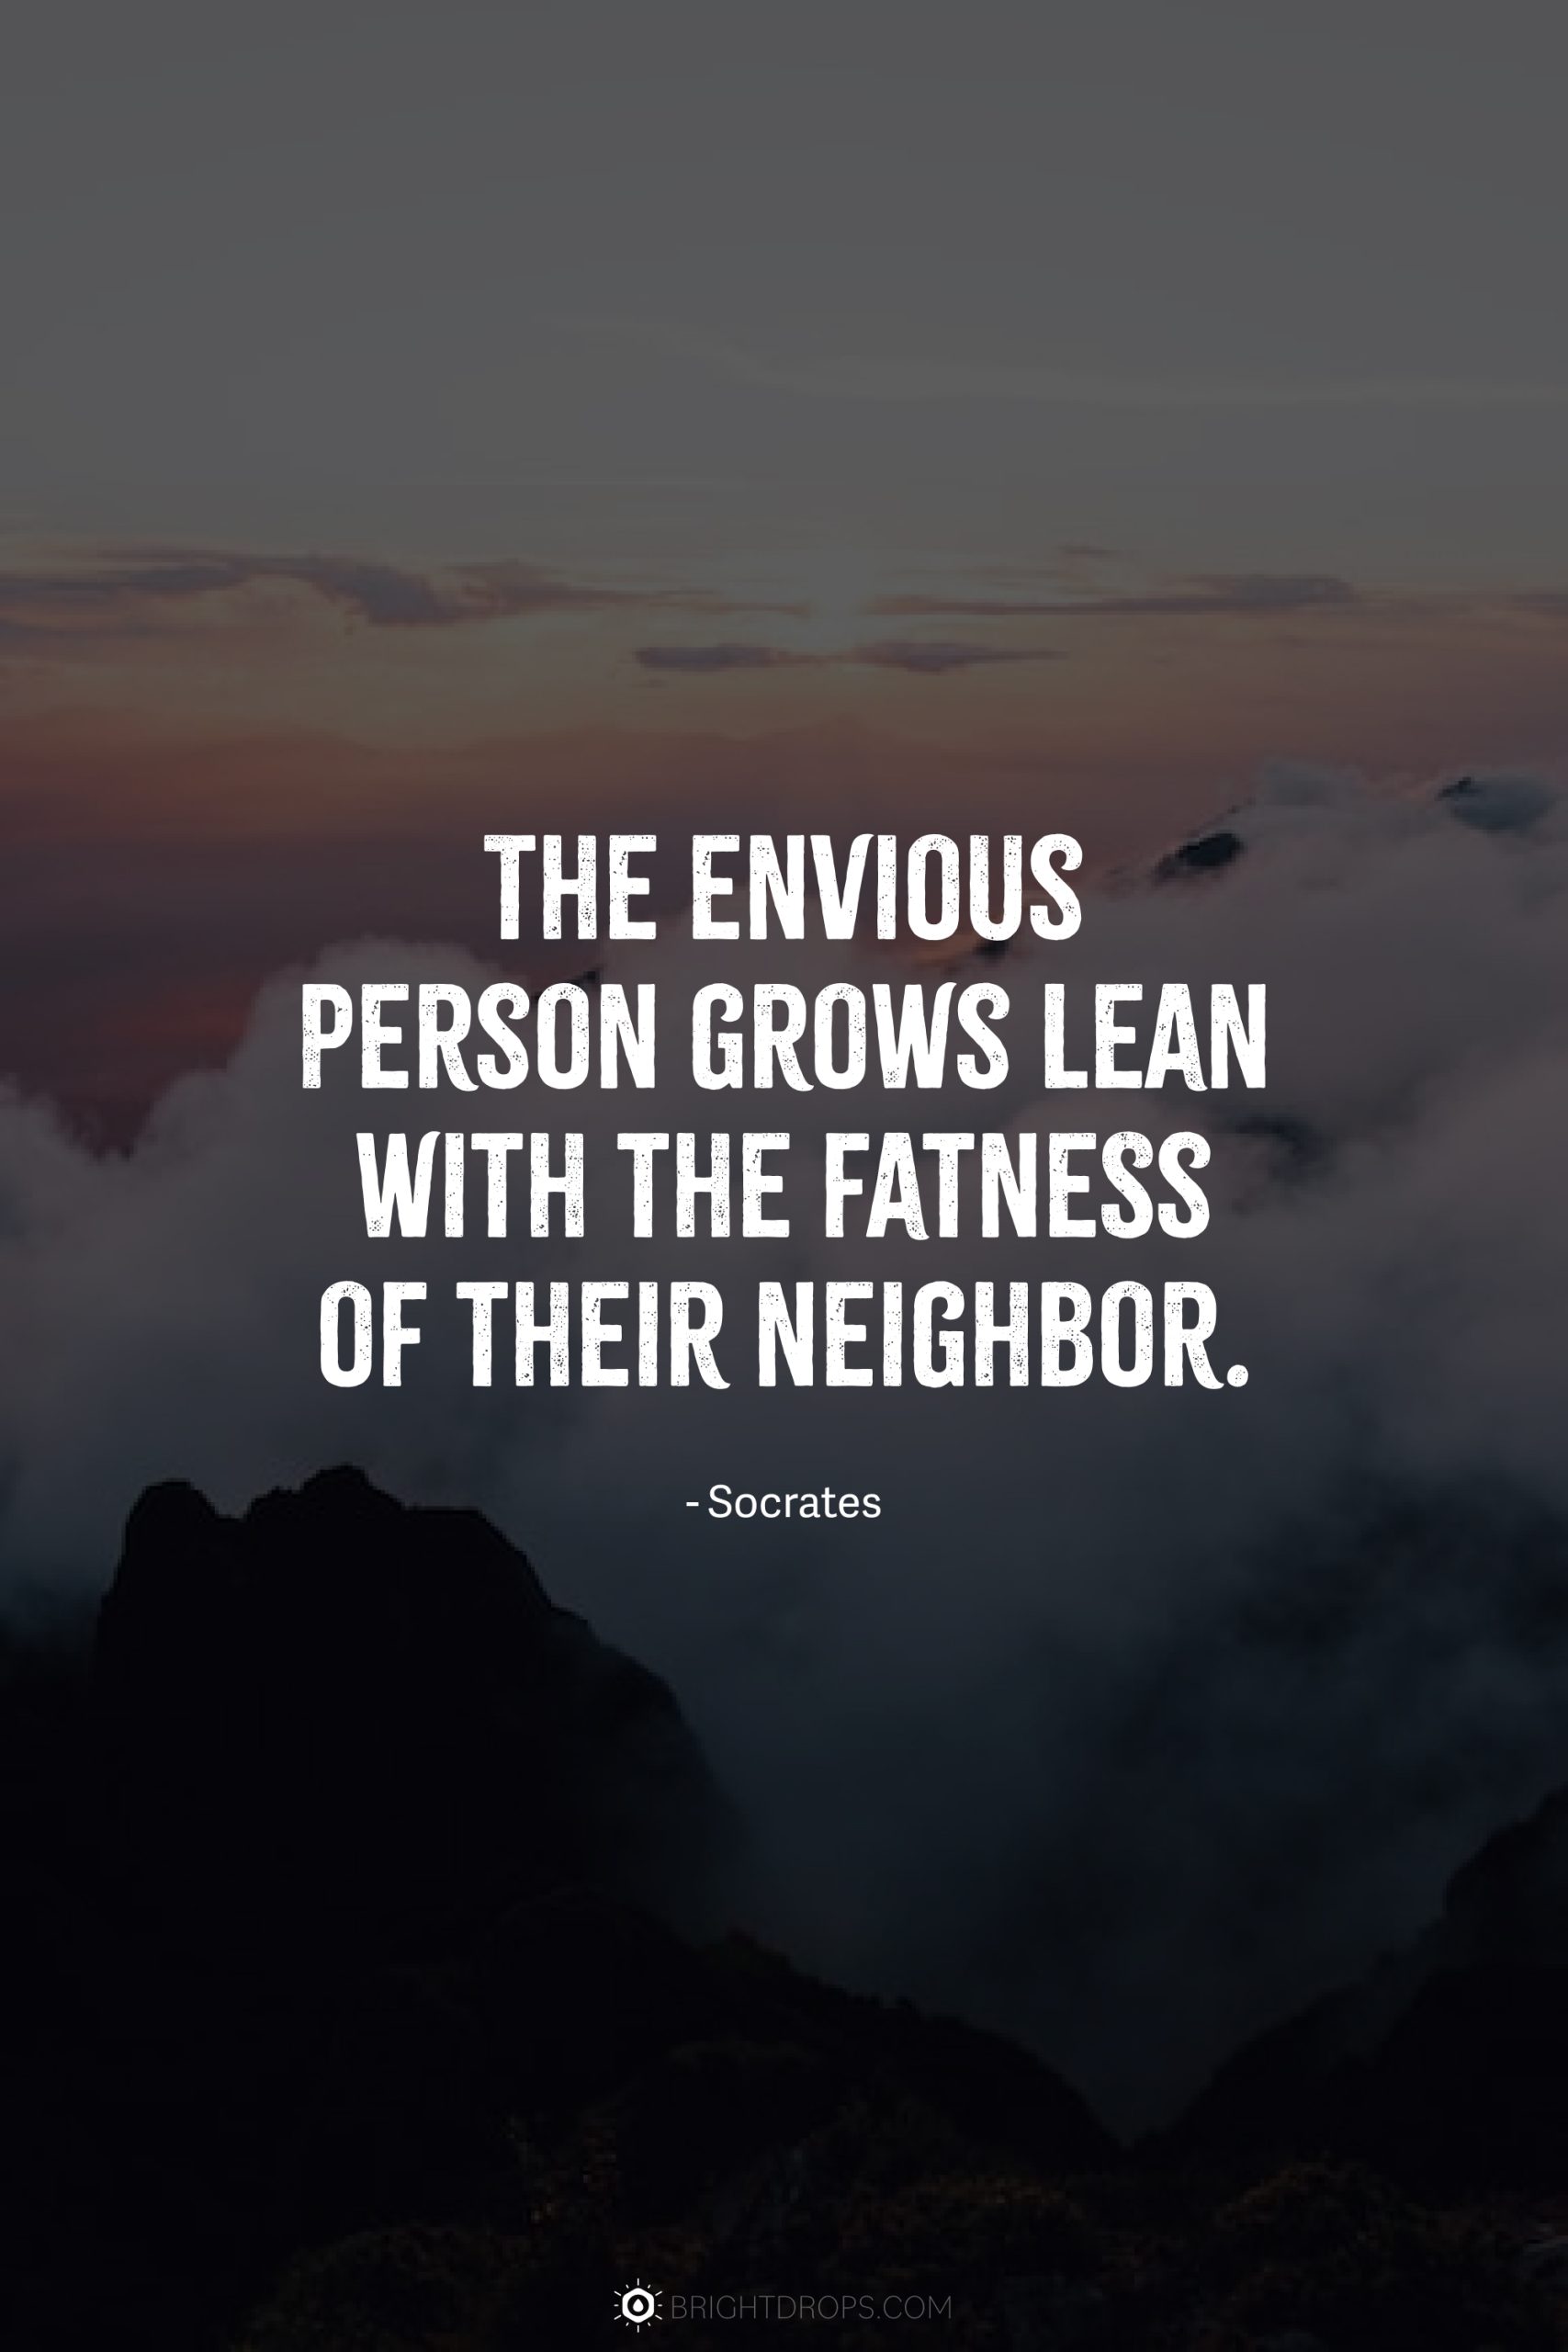 The envious person grows lean with the fatness of their neighbor.